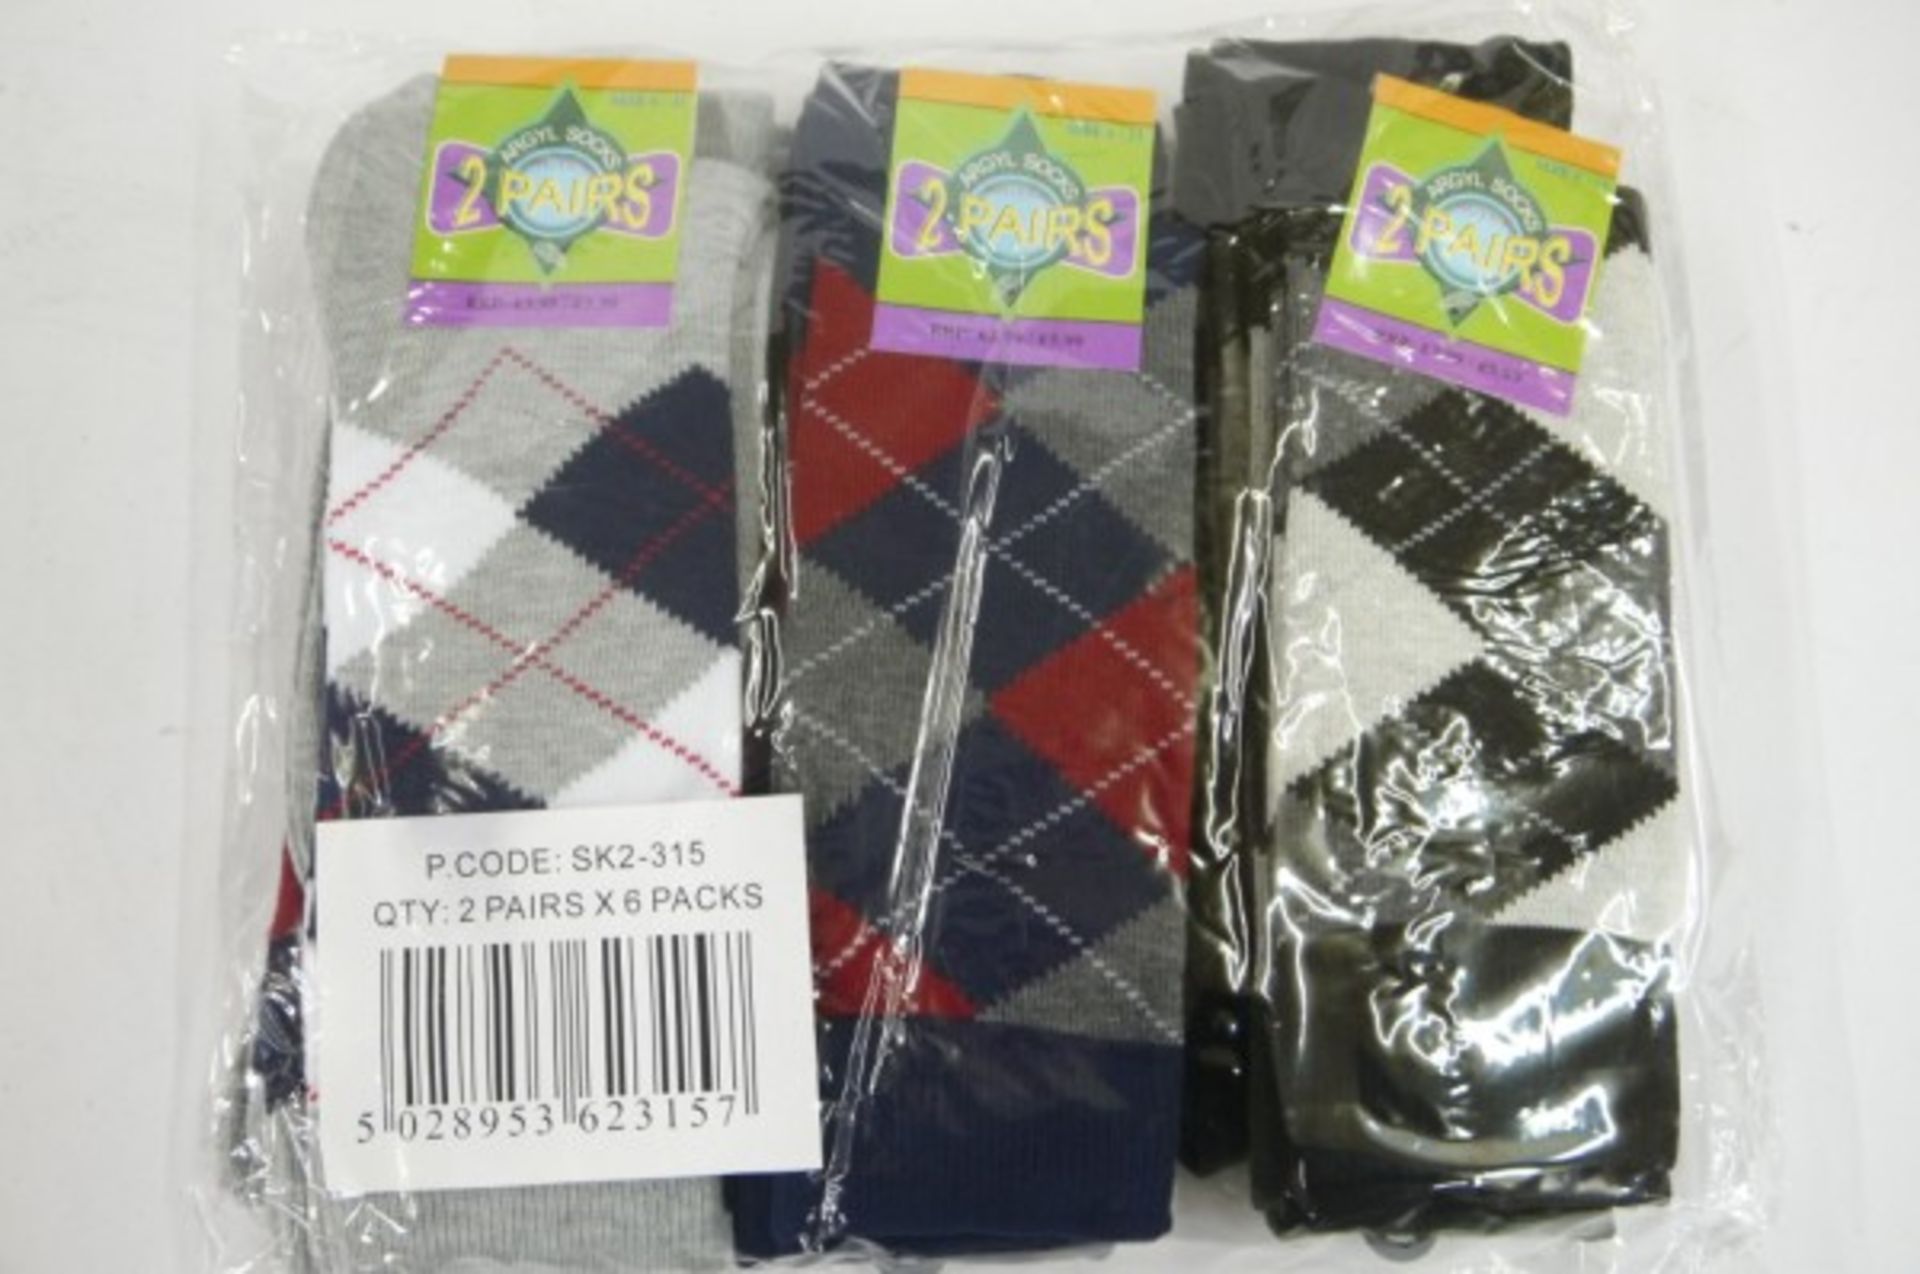 V *TRADE QTY* Brand New 12 Pairs Of Argyle Socks X 10 YOUR BID PRICE TO BE MULTIPLIED BY TEN